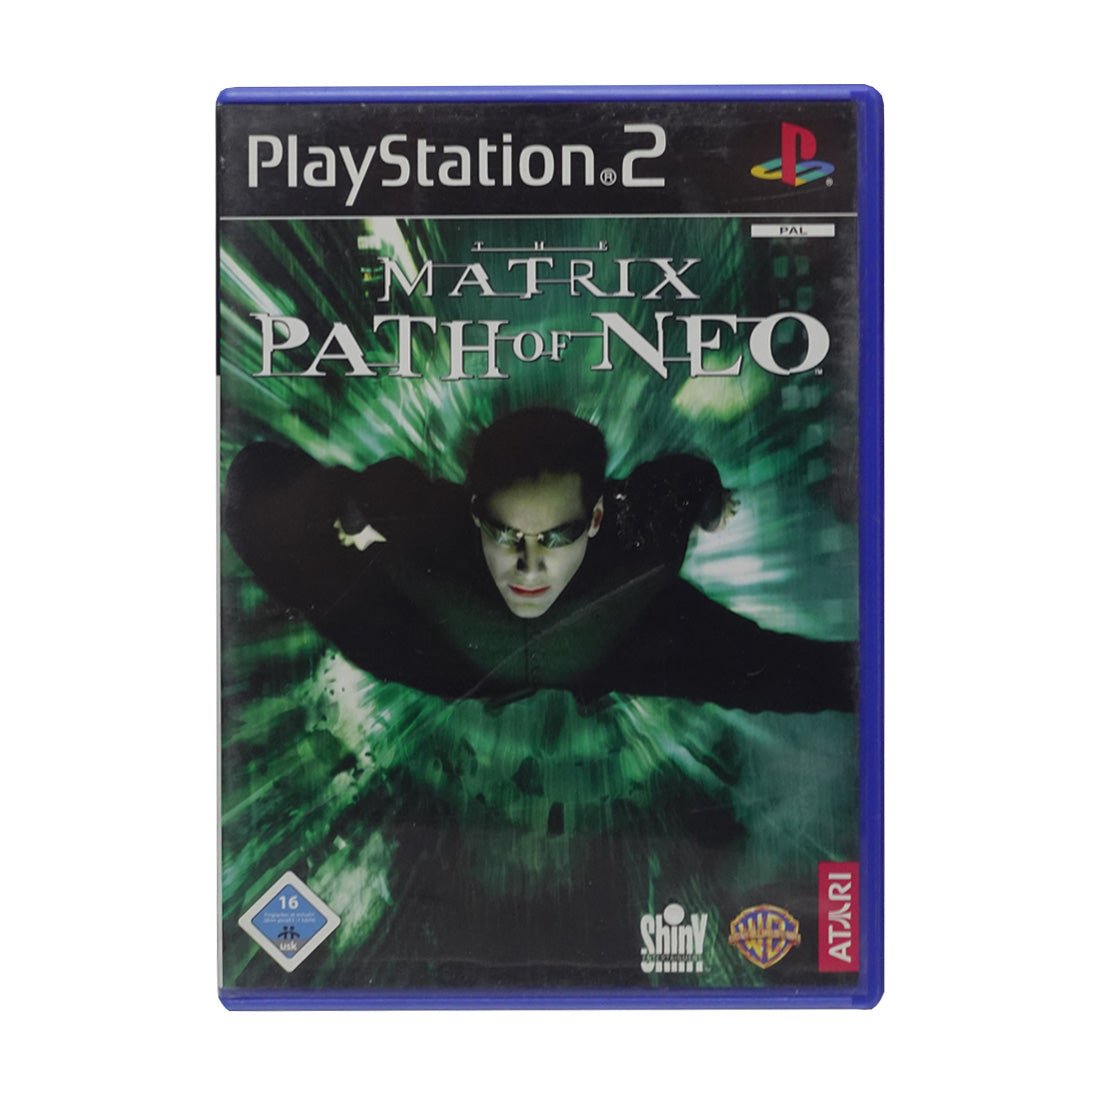 (Pre-Owned) Matrex Path of Neo - PlayStation 2 - ريترو - Store 974 | ستور ٩٧٤